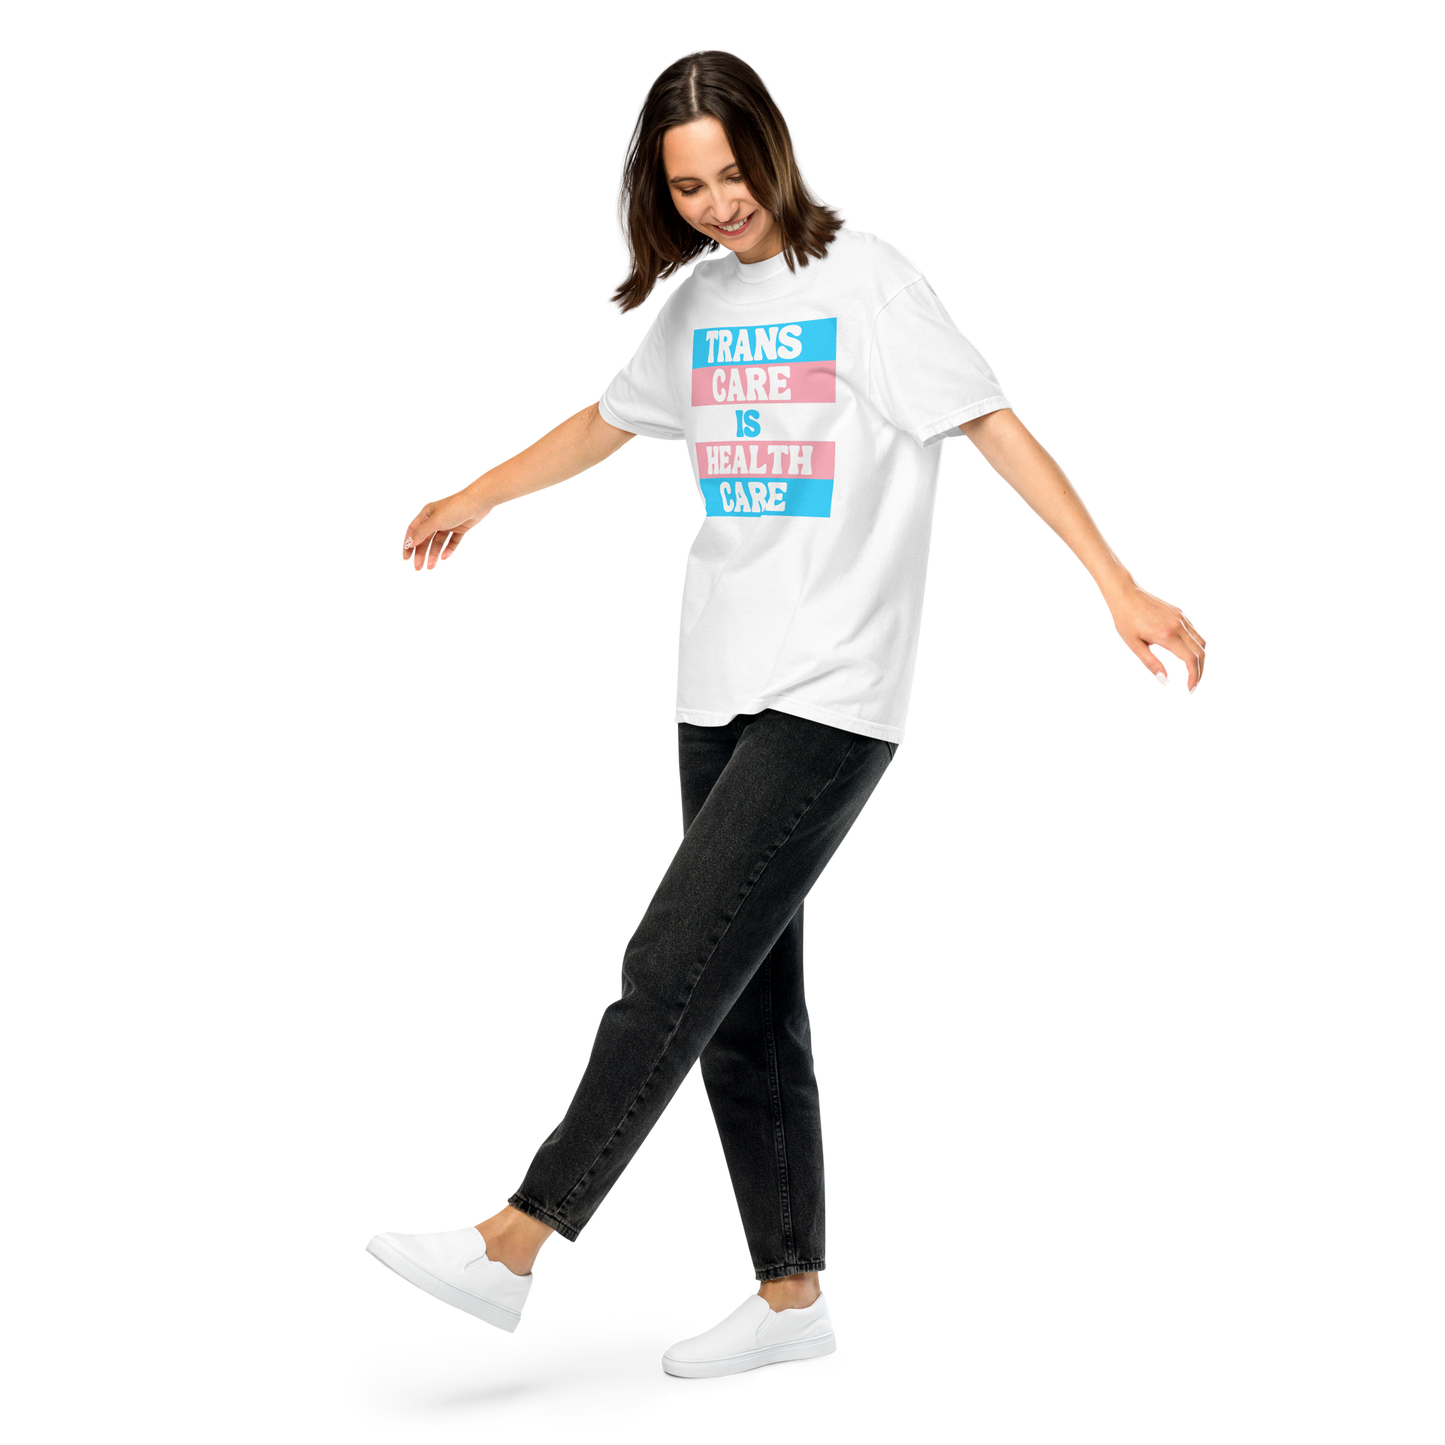 Trans Care is Health Care Unisex T-shirt Modeled on Woman